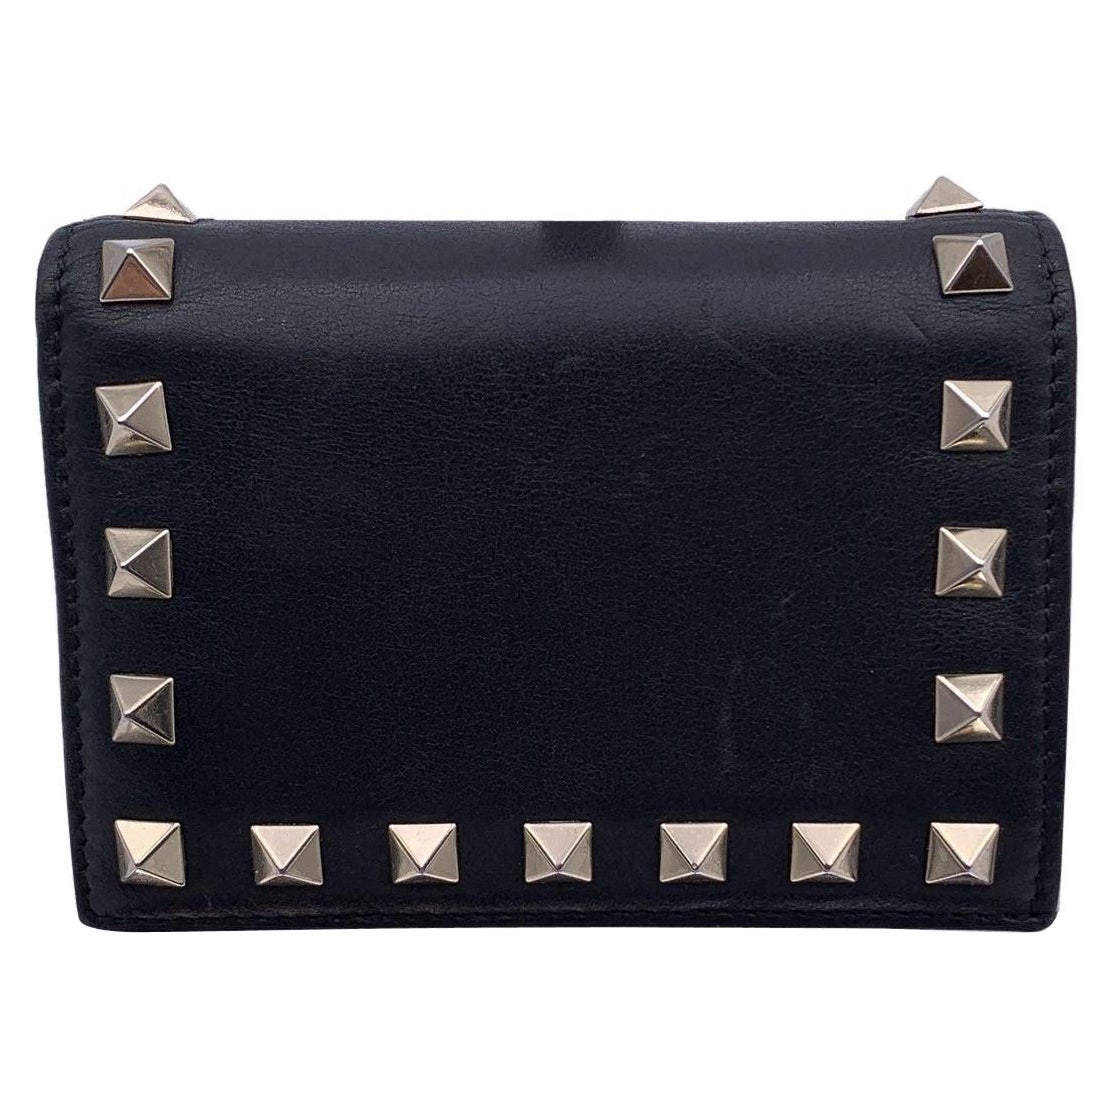 Valentino Black Leather Rockstud Compact French Flap Wallet